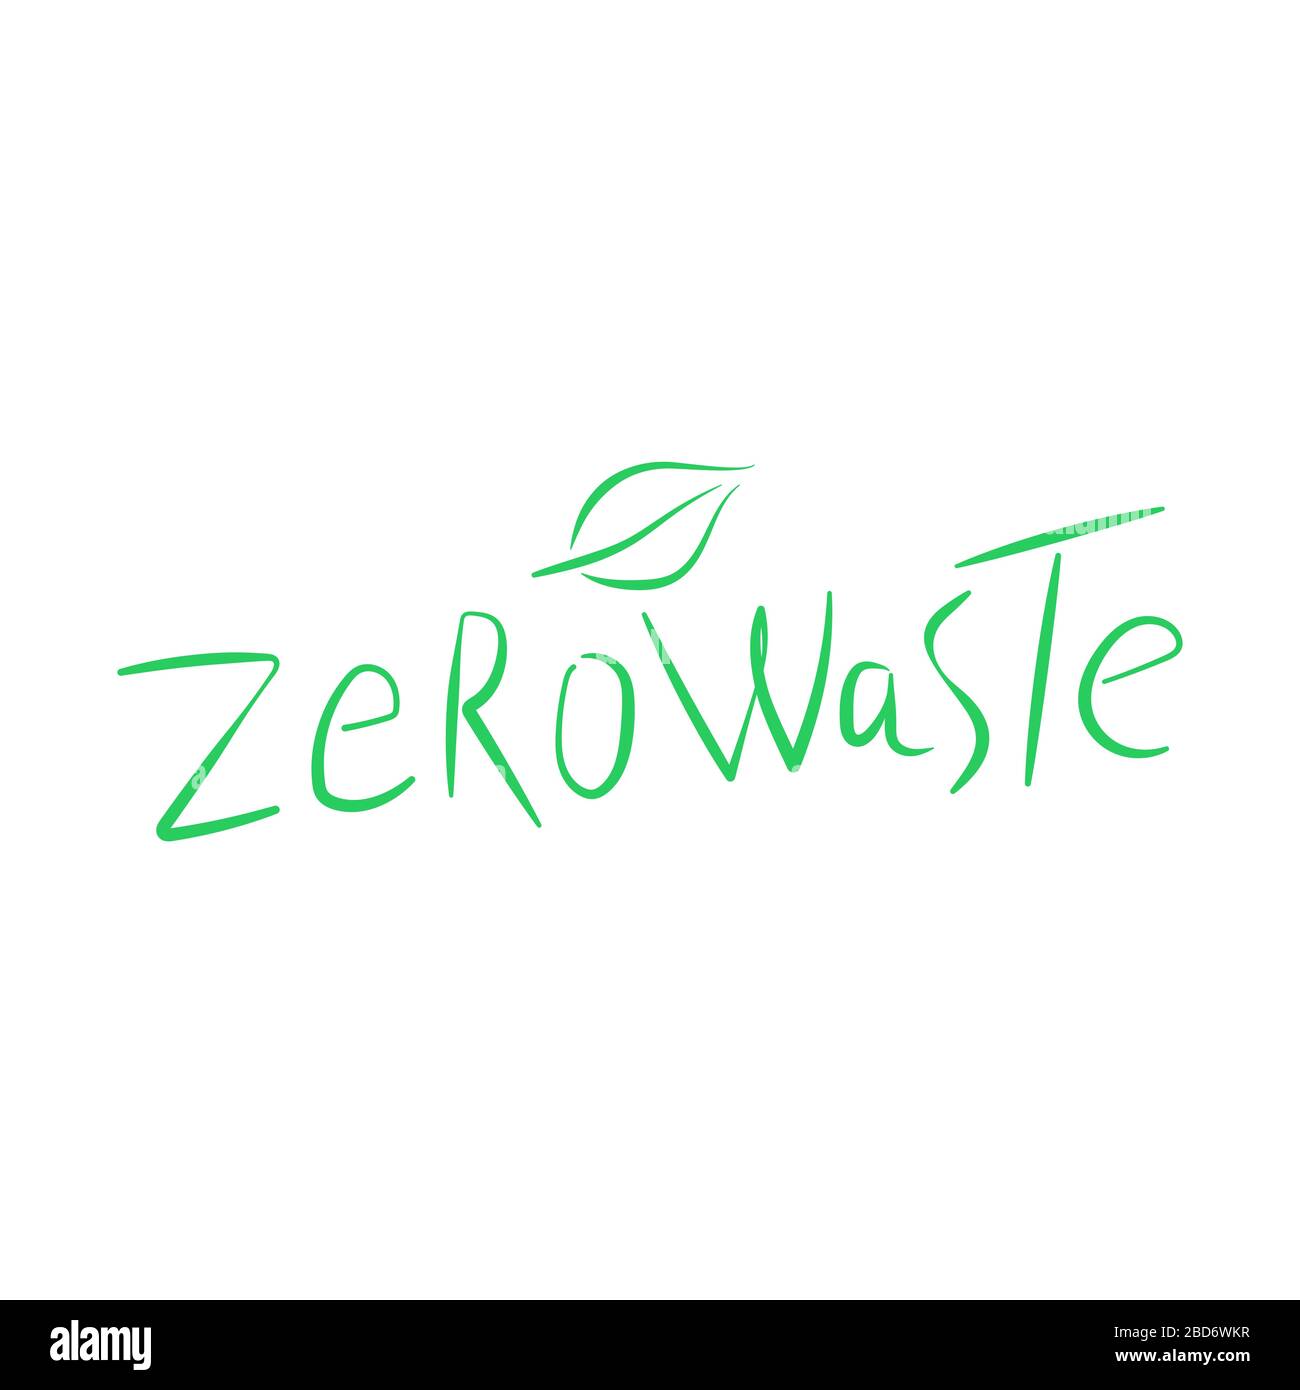 Zero waste handwritten text title sign with green tree leaf. Ecology management concept isolated illustration on white background. Vector stock illust Stock Vector